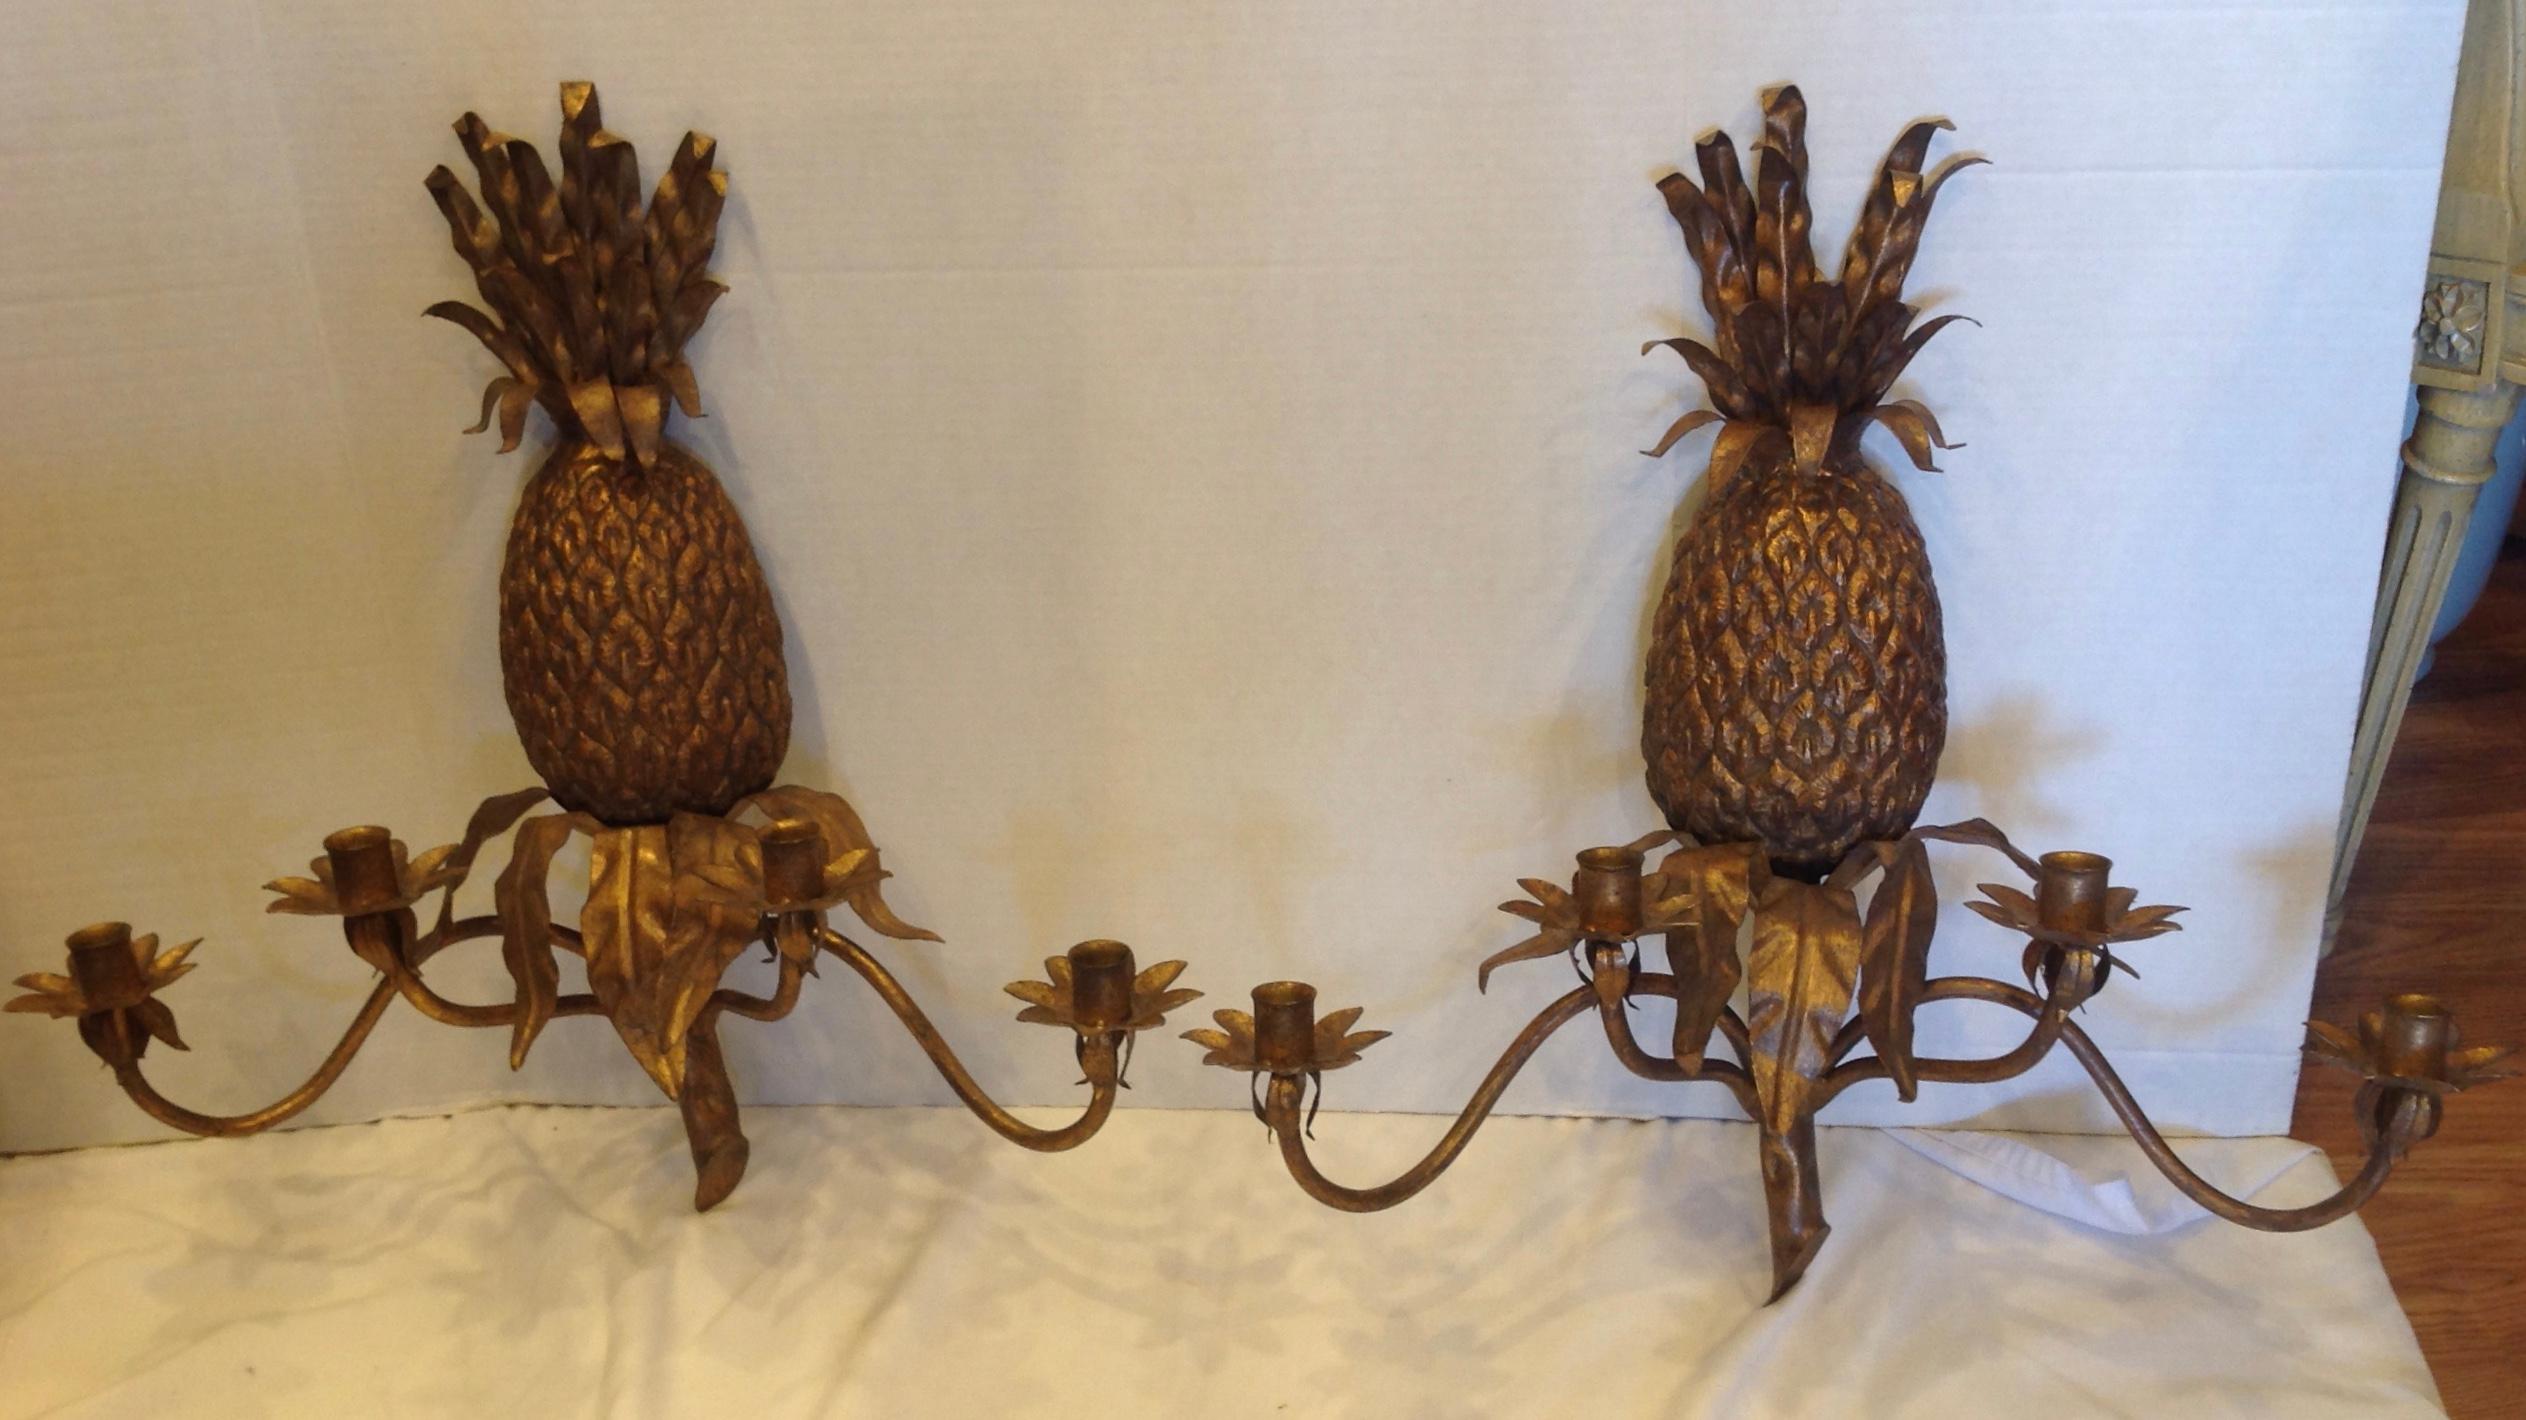 Chunky life size highly detailed with gilt accents and designed with 4 arms.
The sconces are whimsical and a perfect accent for tropical or island decor.